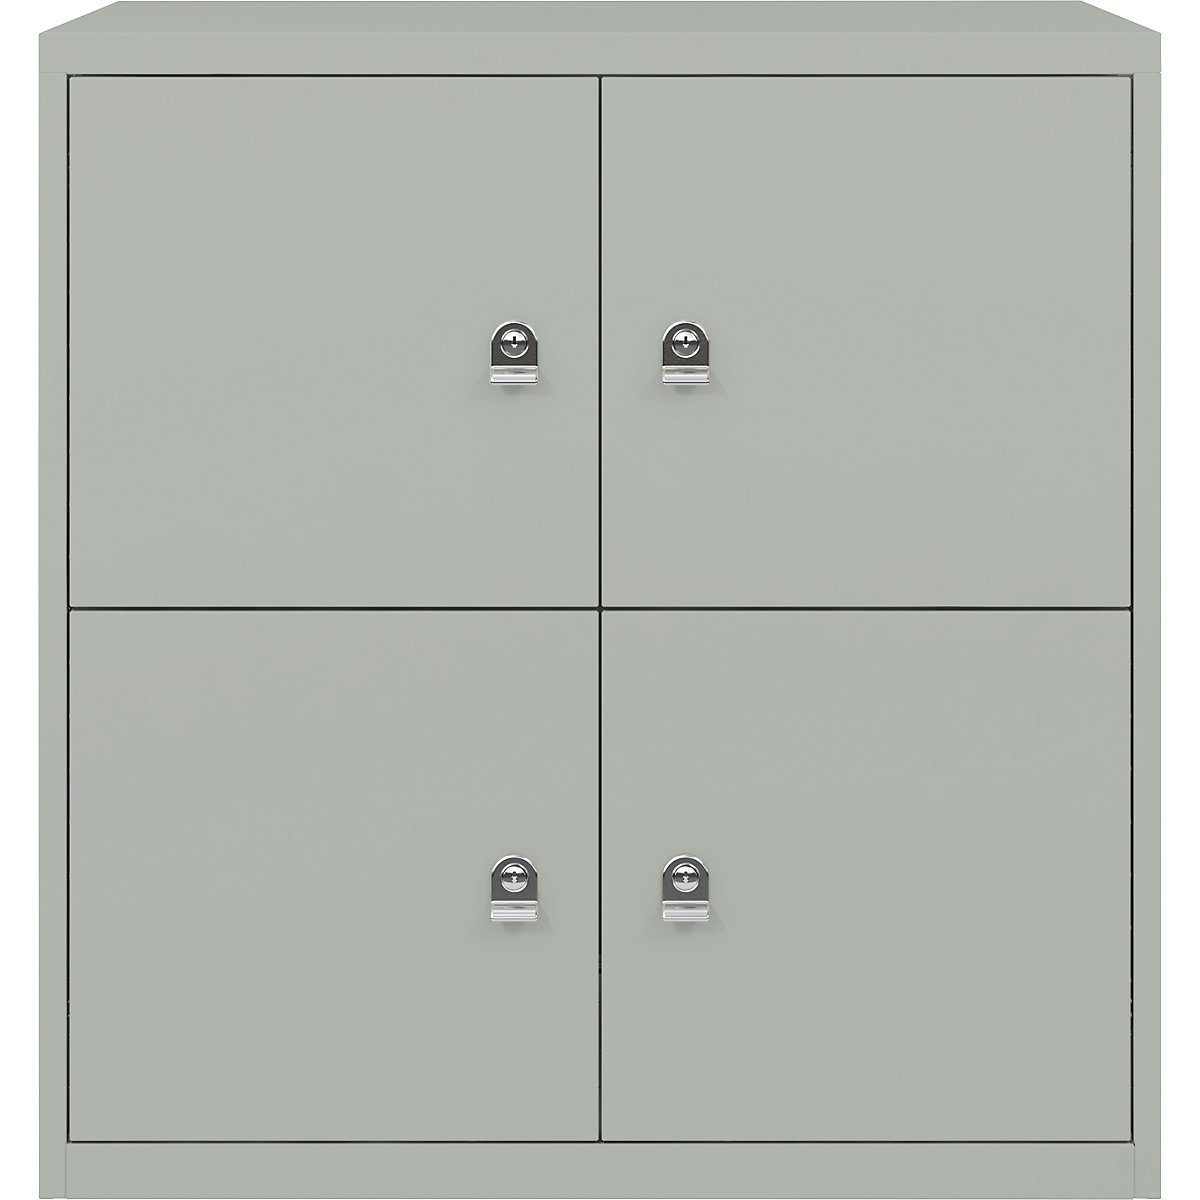 LateralFile™ lodge – BISLEY, with 4 lockable compartments, height 375 mm each, york